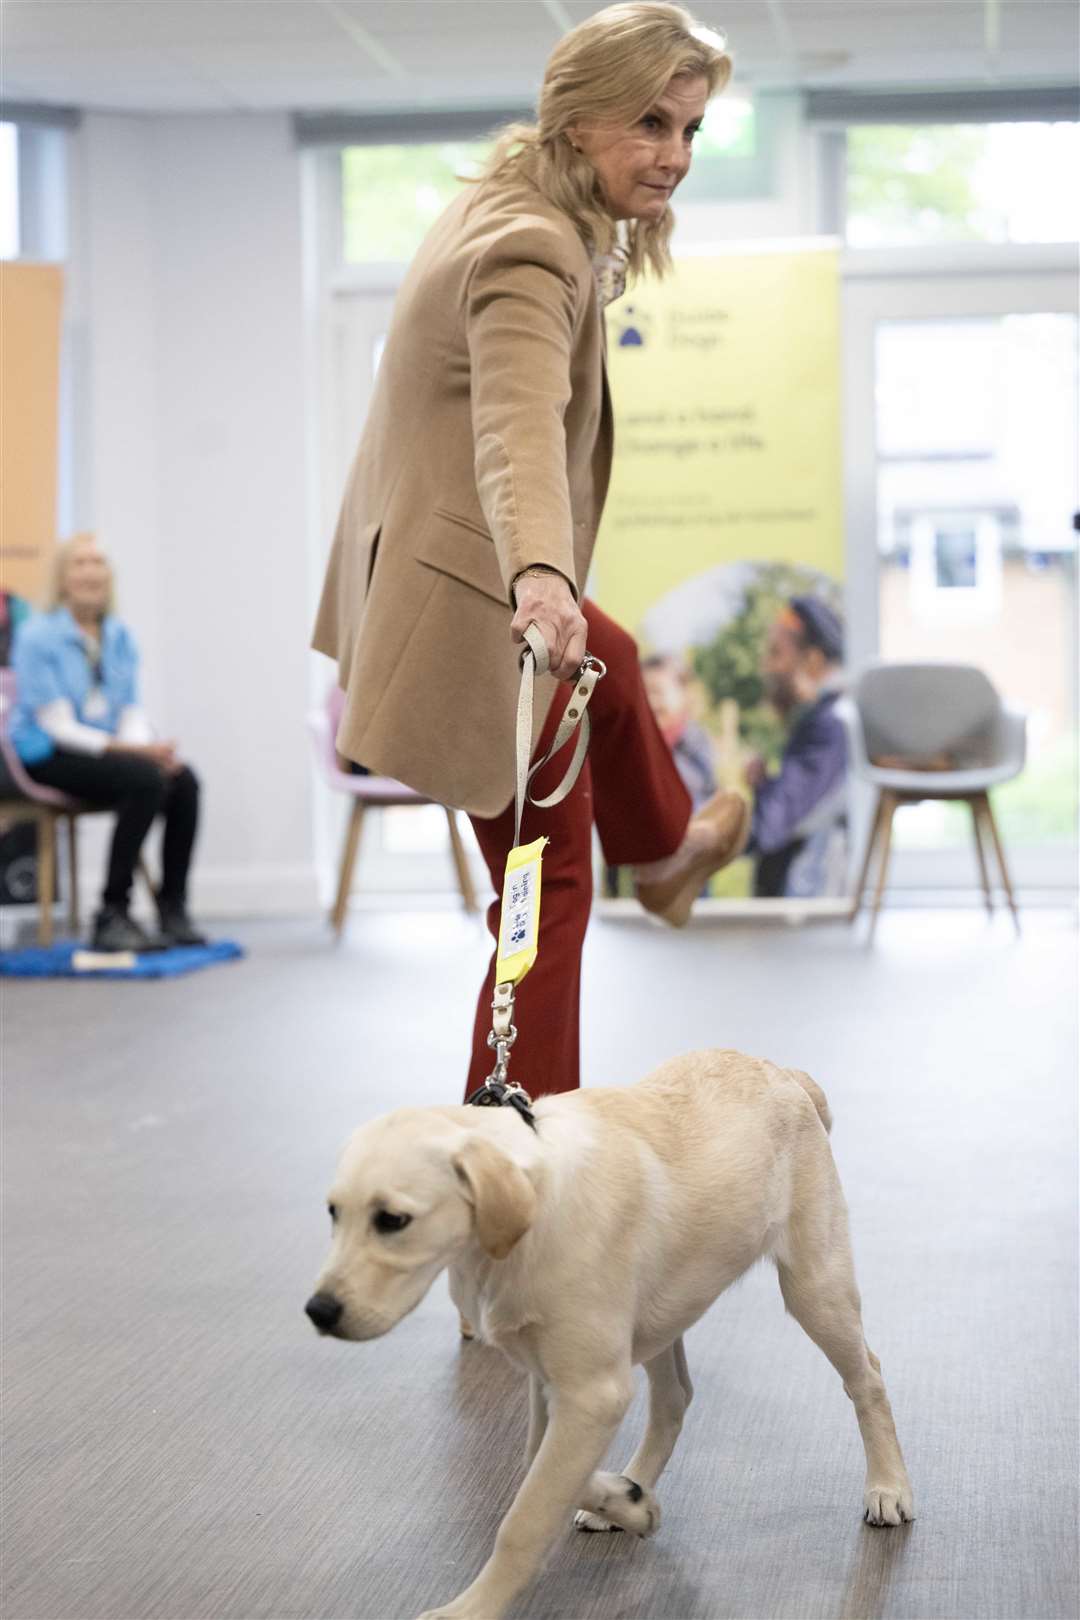 The Duchess of Edinburgh took part in a puppy class at the Guide Dogs for the Blind Association Training Centre in Reading in May (Paul Grover/Daily Telegraph/PA)